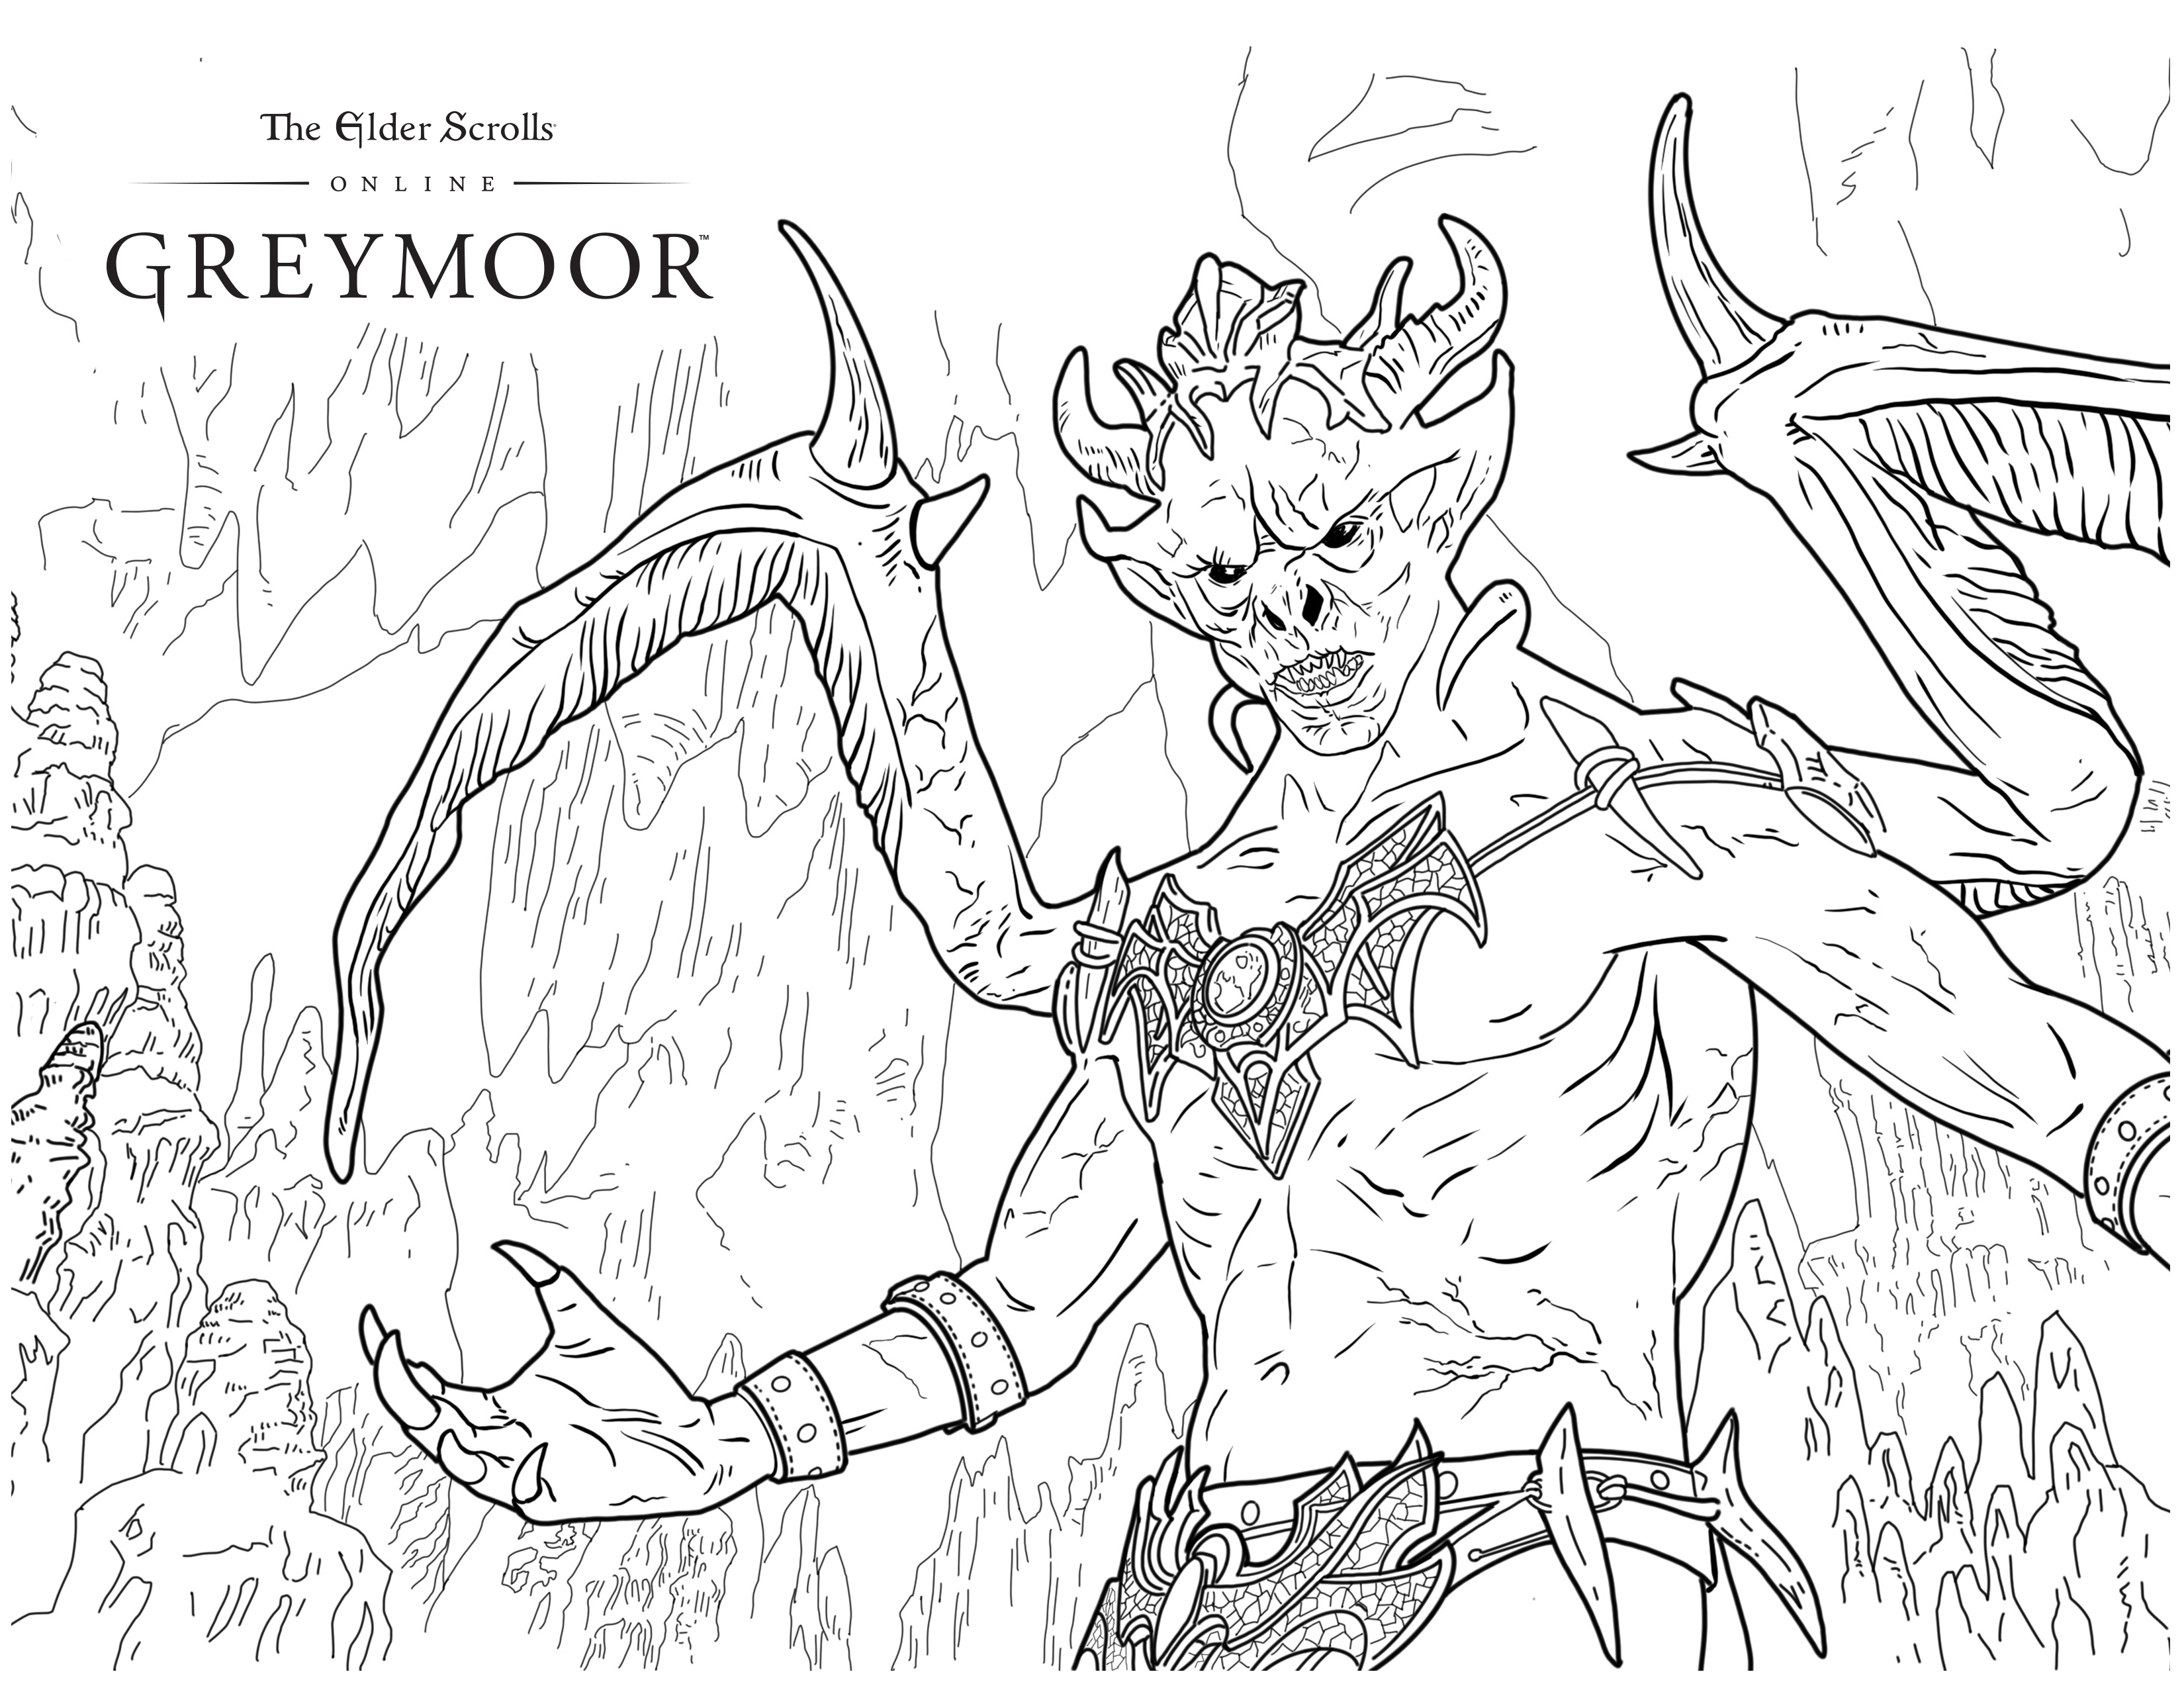 Get Creative at Home with these Greymoor Coloring Pages - The ...